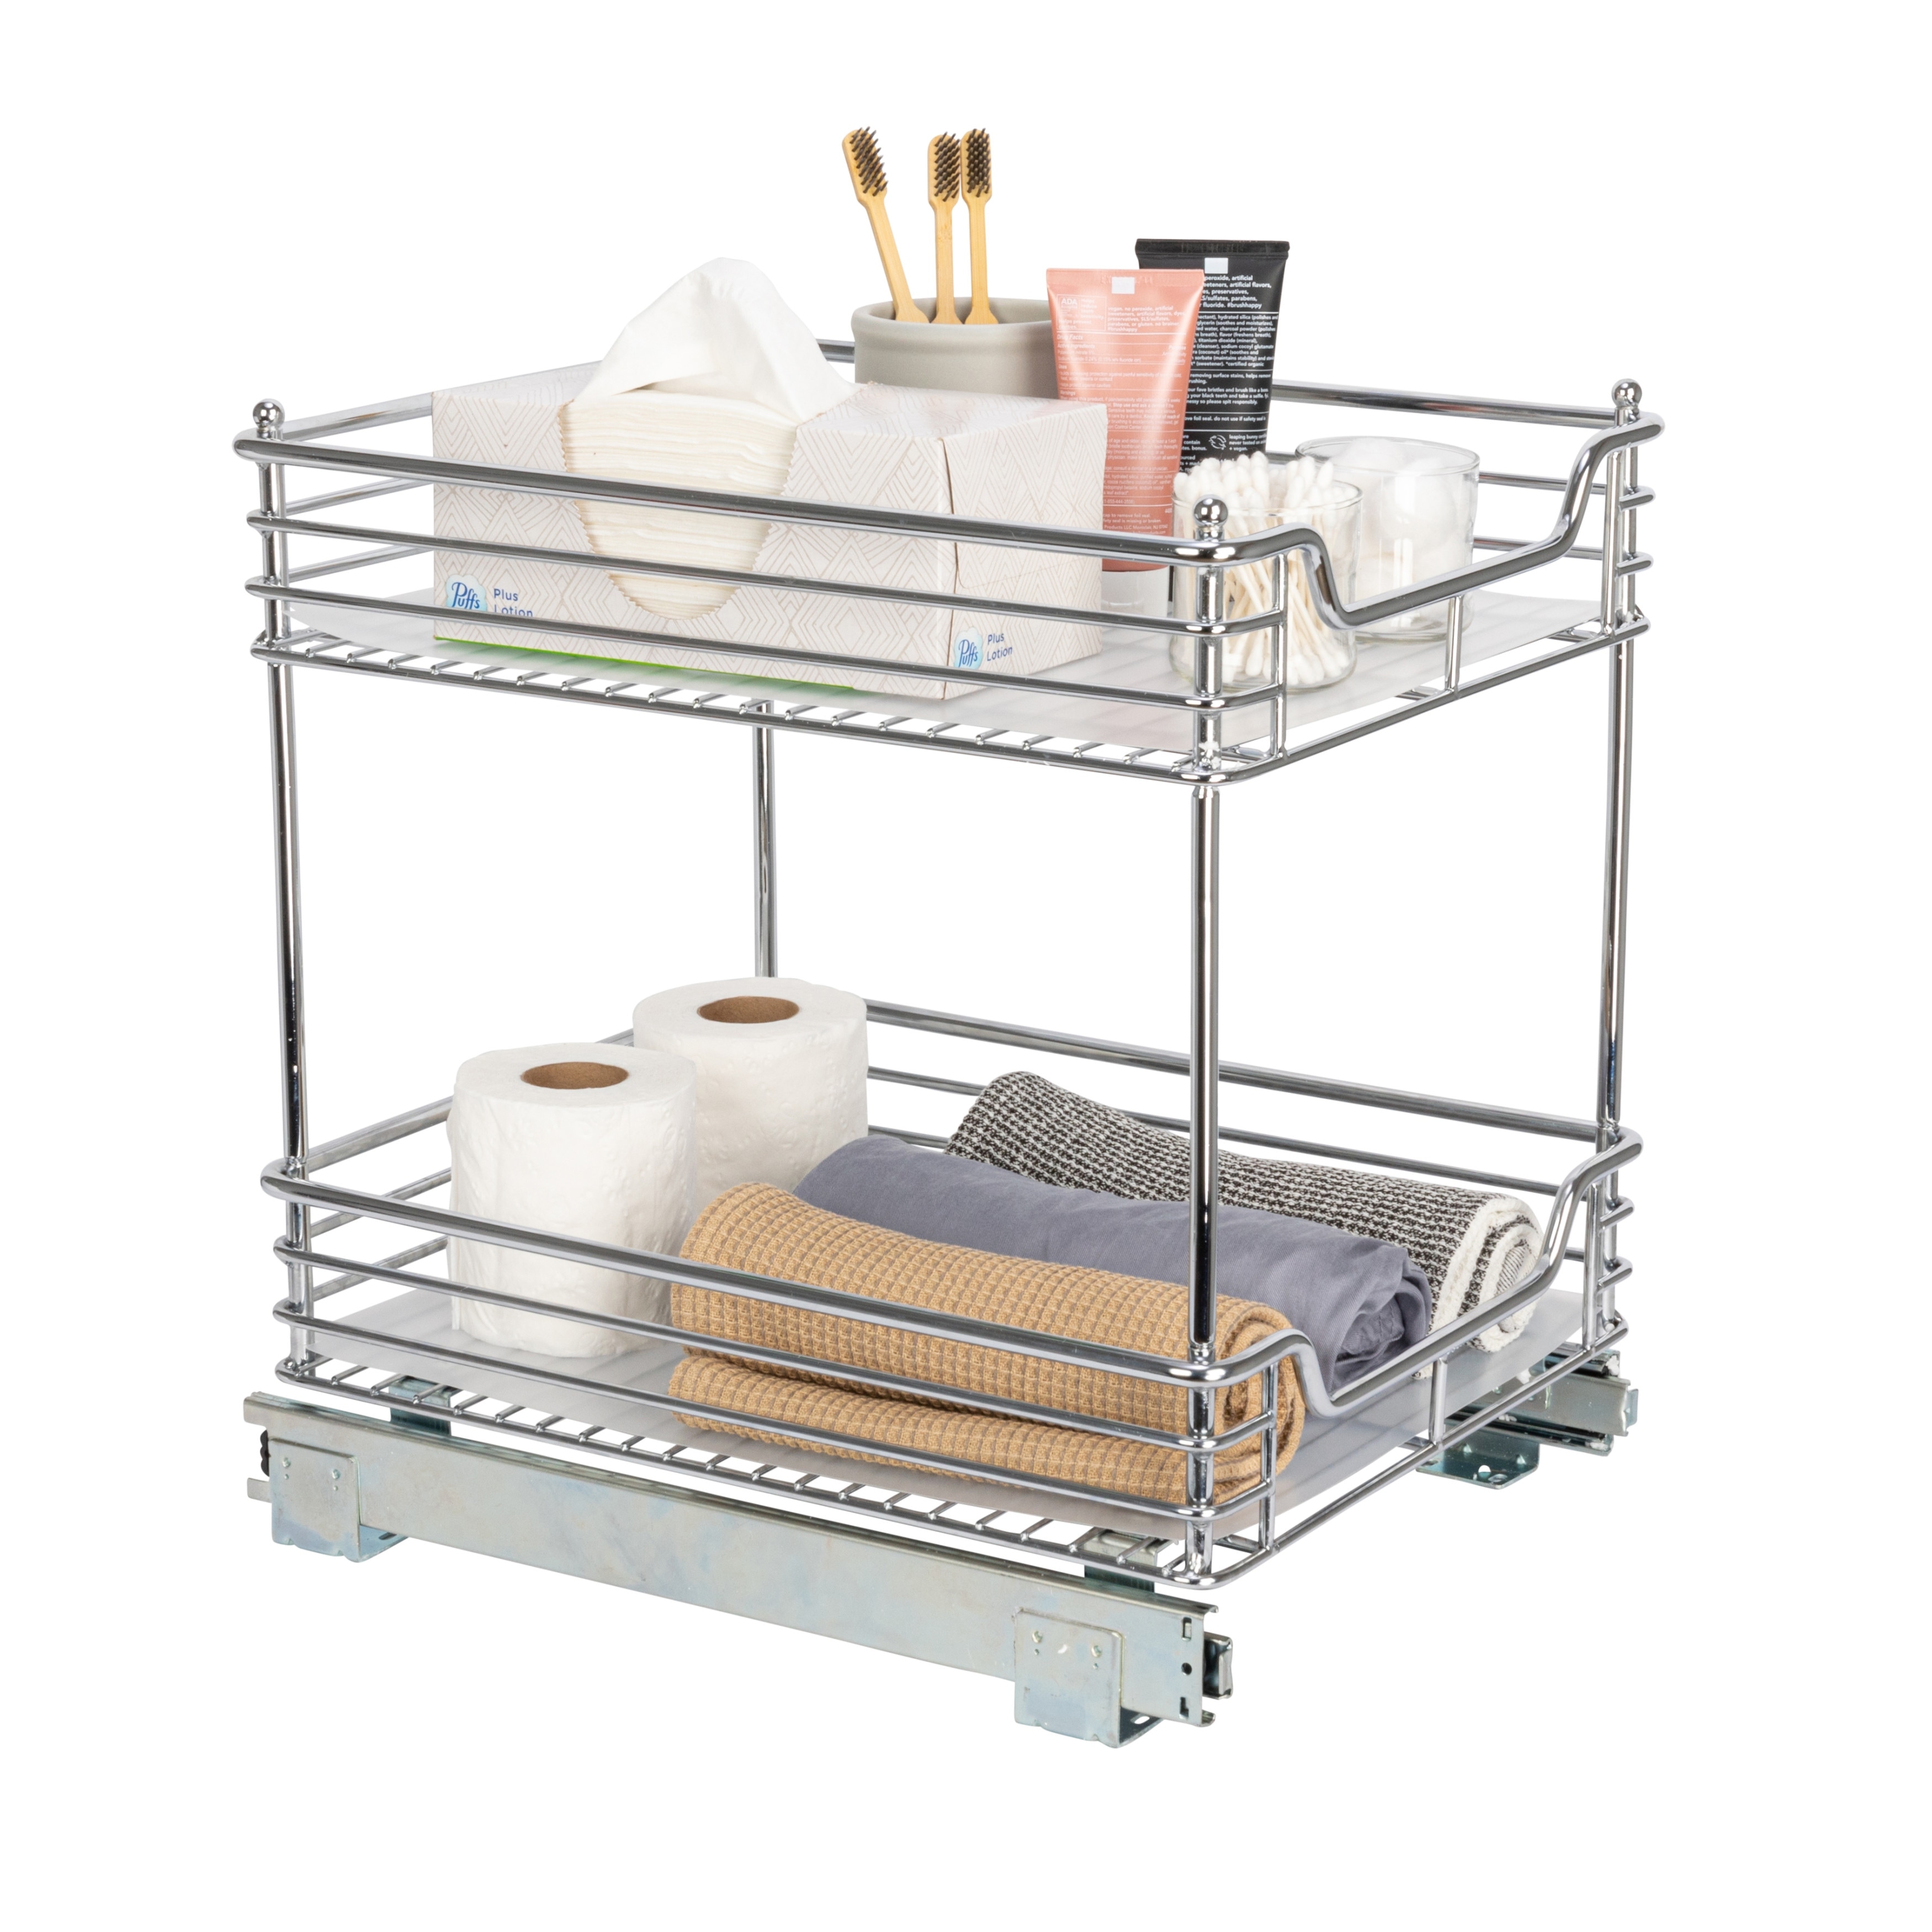 https://ak1.ostkcdn.com/images/products/is/images/direct/98b0fb102ced1f069ab9109c02d1cbc0af65bf77/Glidez-2-Tier-Steel-Pull-Out-Slide-Out-Storage-Organizer-with-Plastic-Liners.jpg